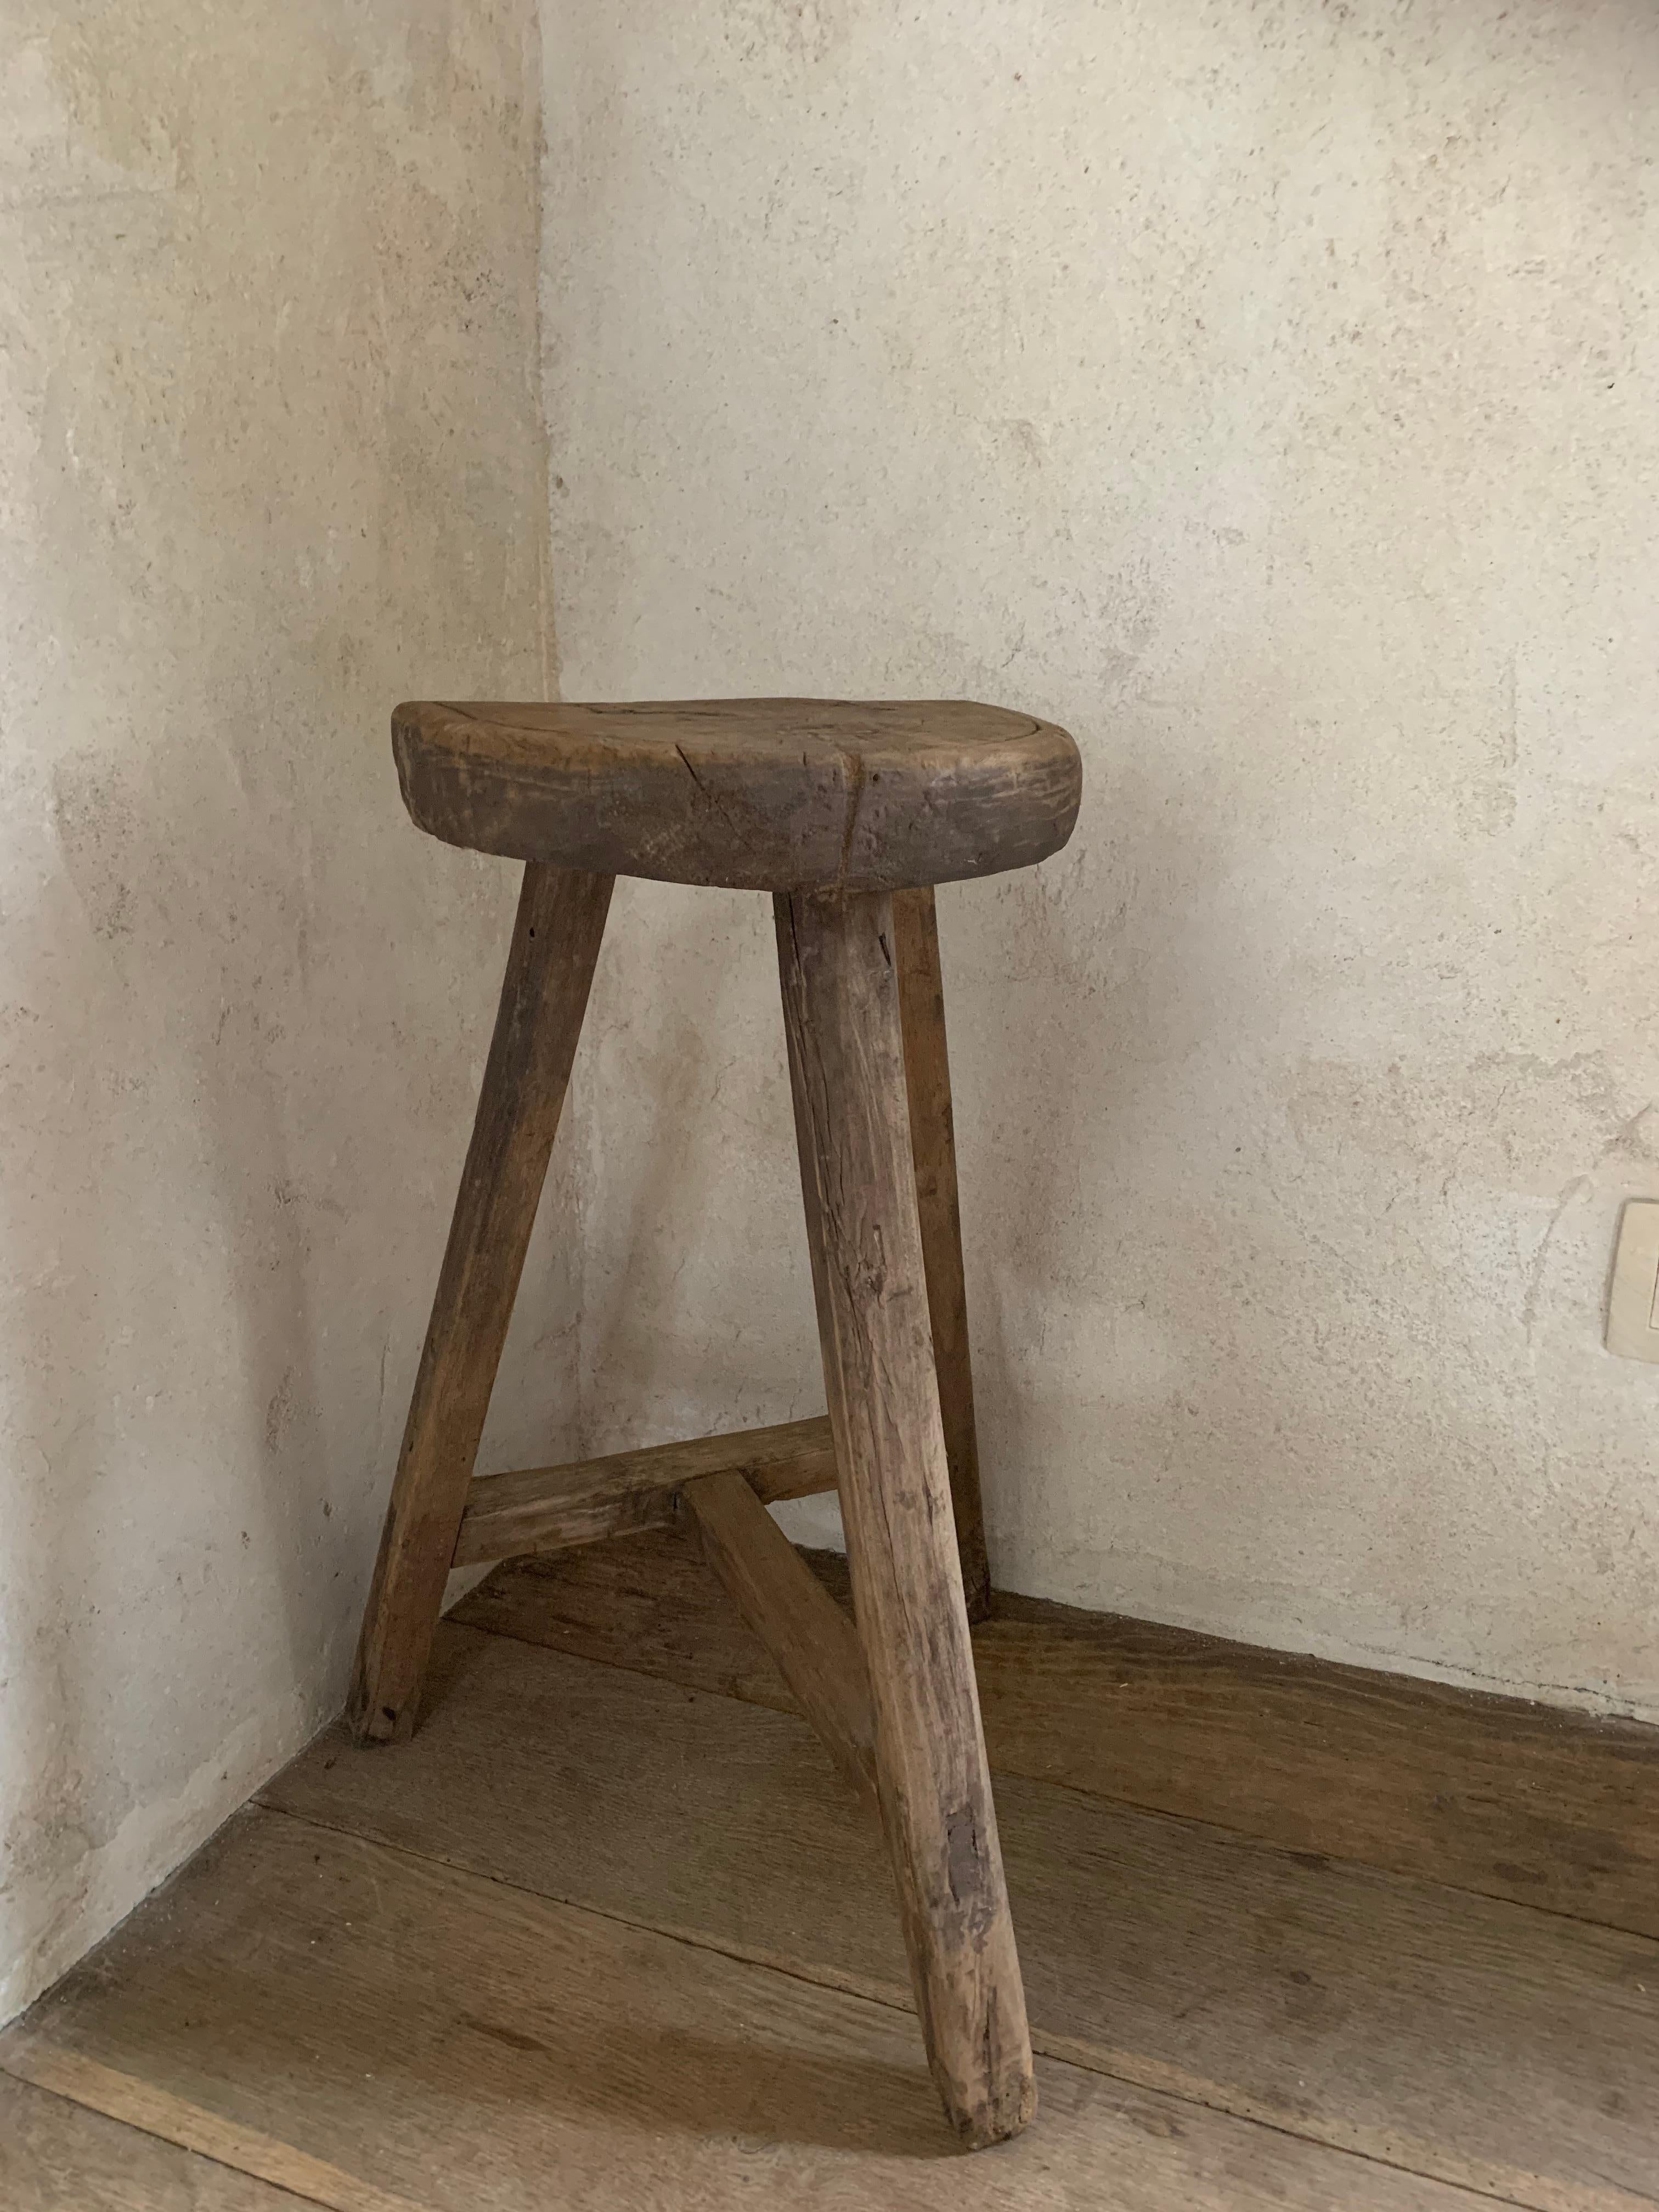 A good example of a 19th century Chinese stool with a one slab top on beautifully grained elm. Very sturdy and ready for everyday use.